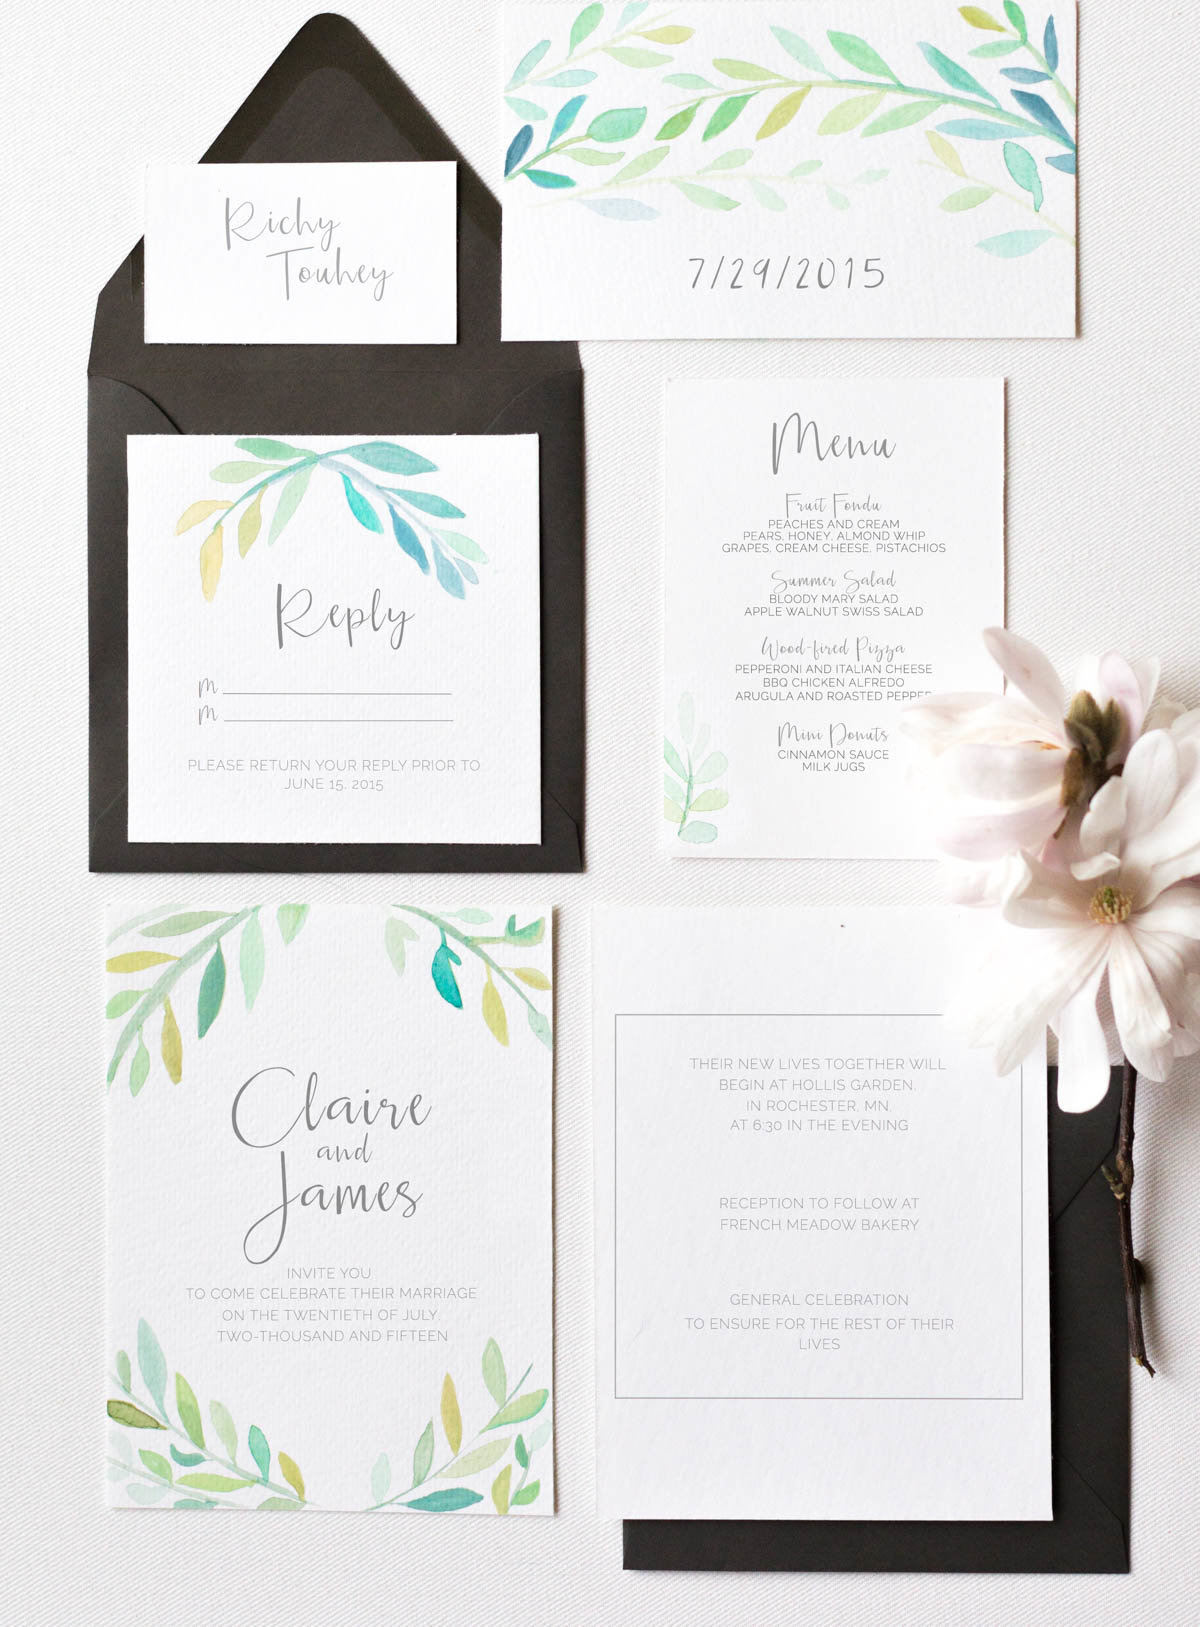 simple wedding invite suite styling of watercolor and foliage black accents and magnolia flowers